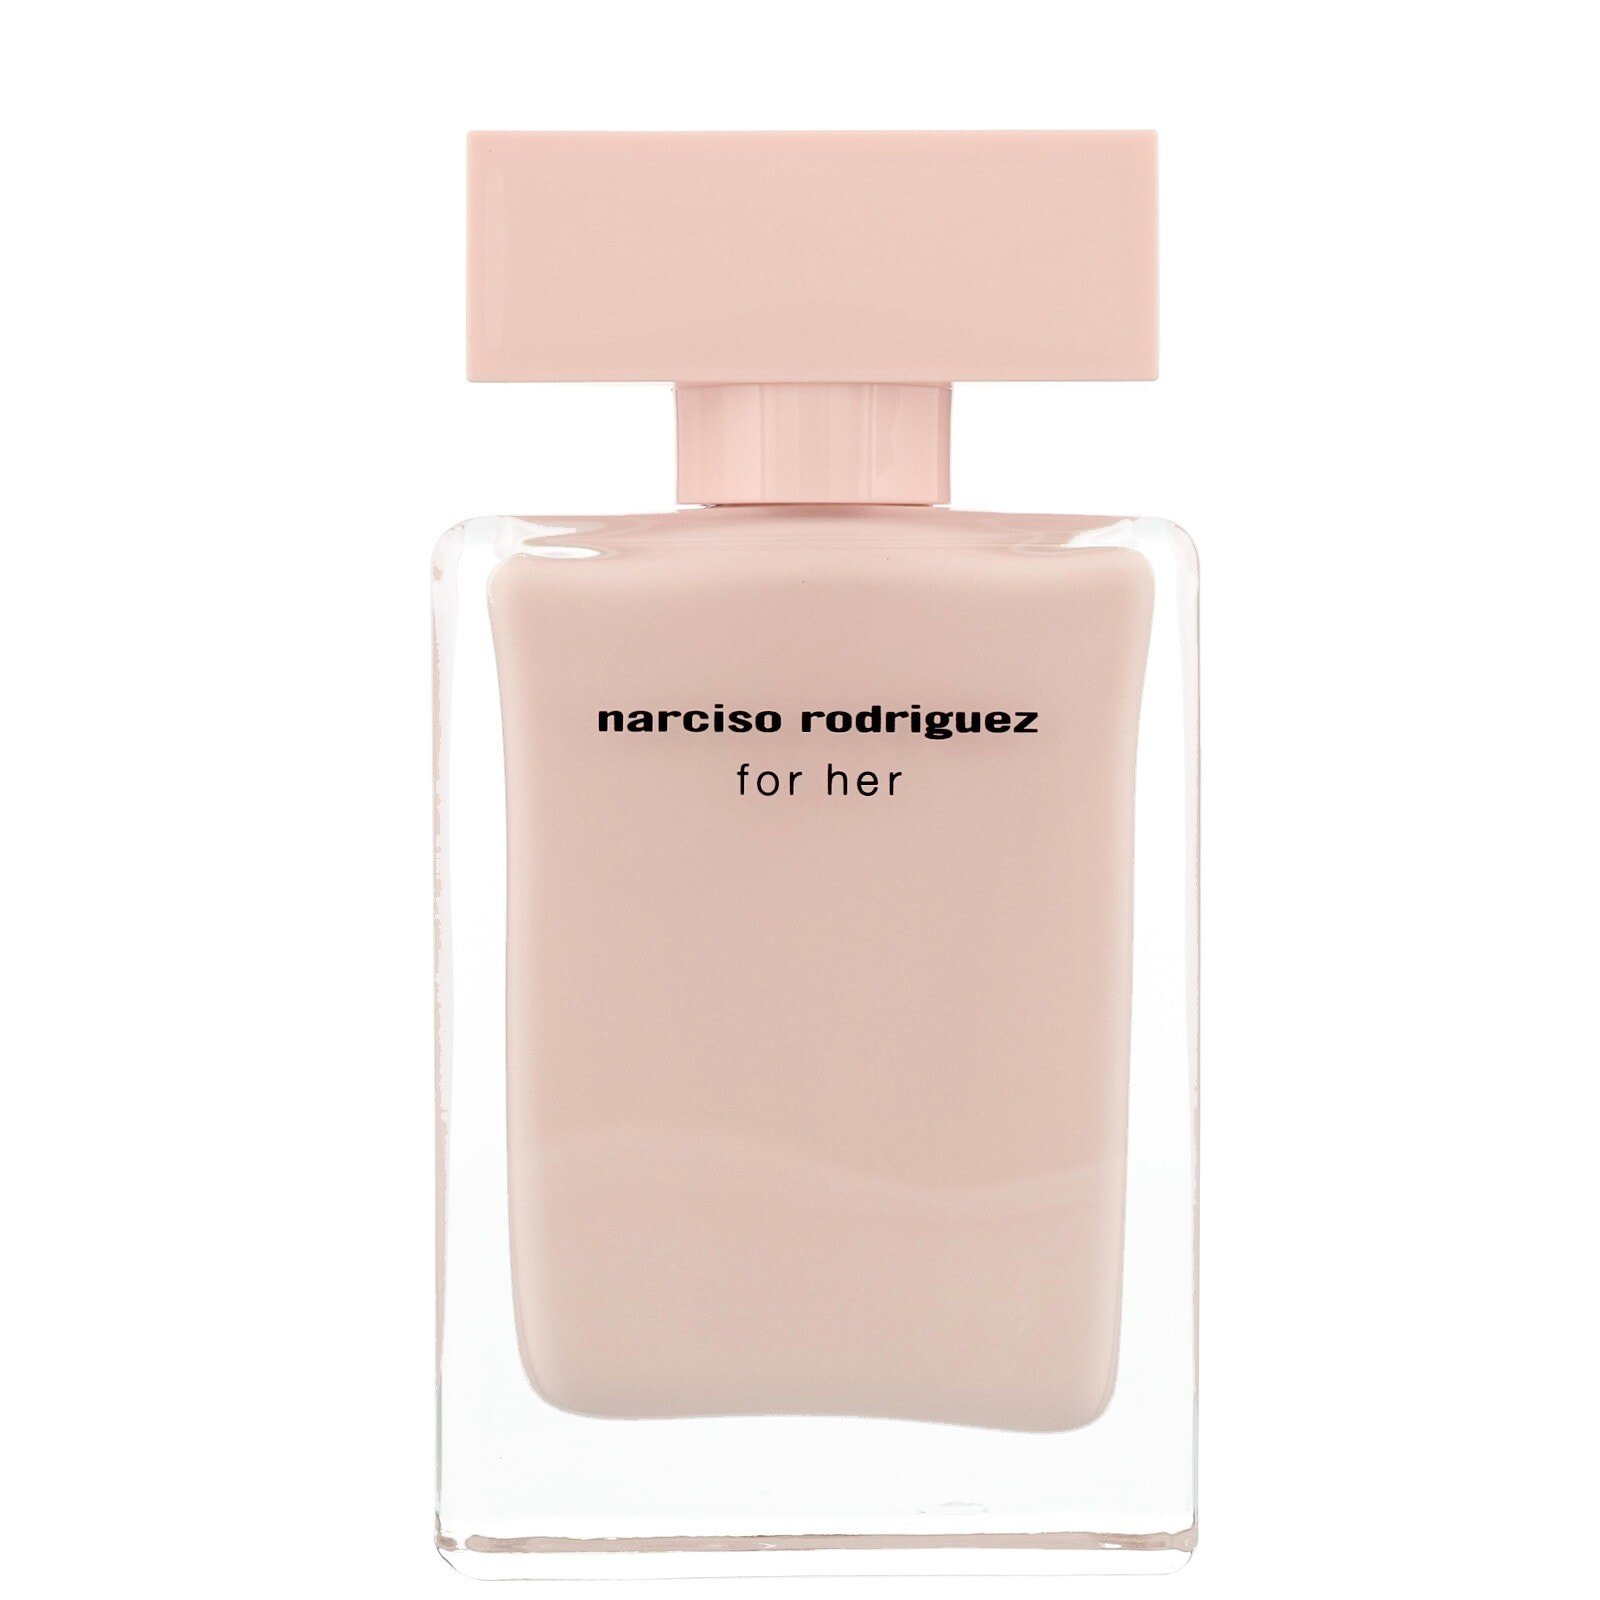 Narciso Rodriguez For Her Парфюмерная вода 50 мл